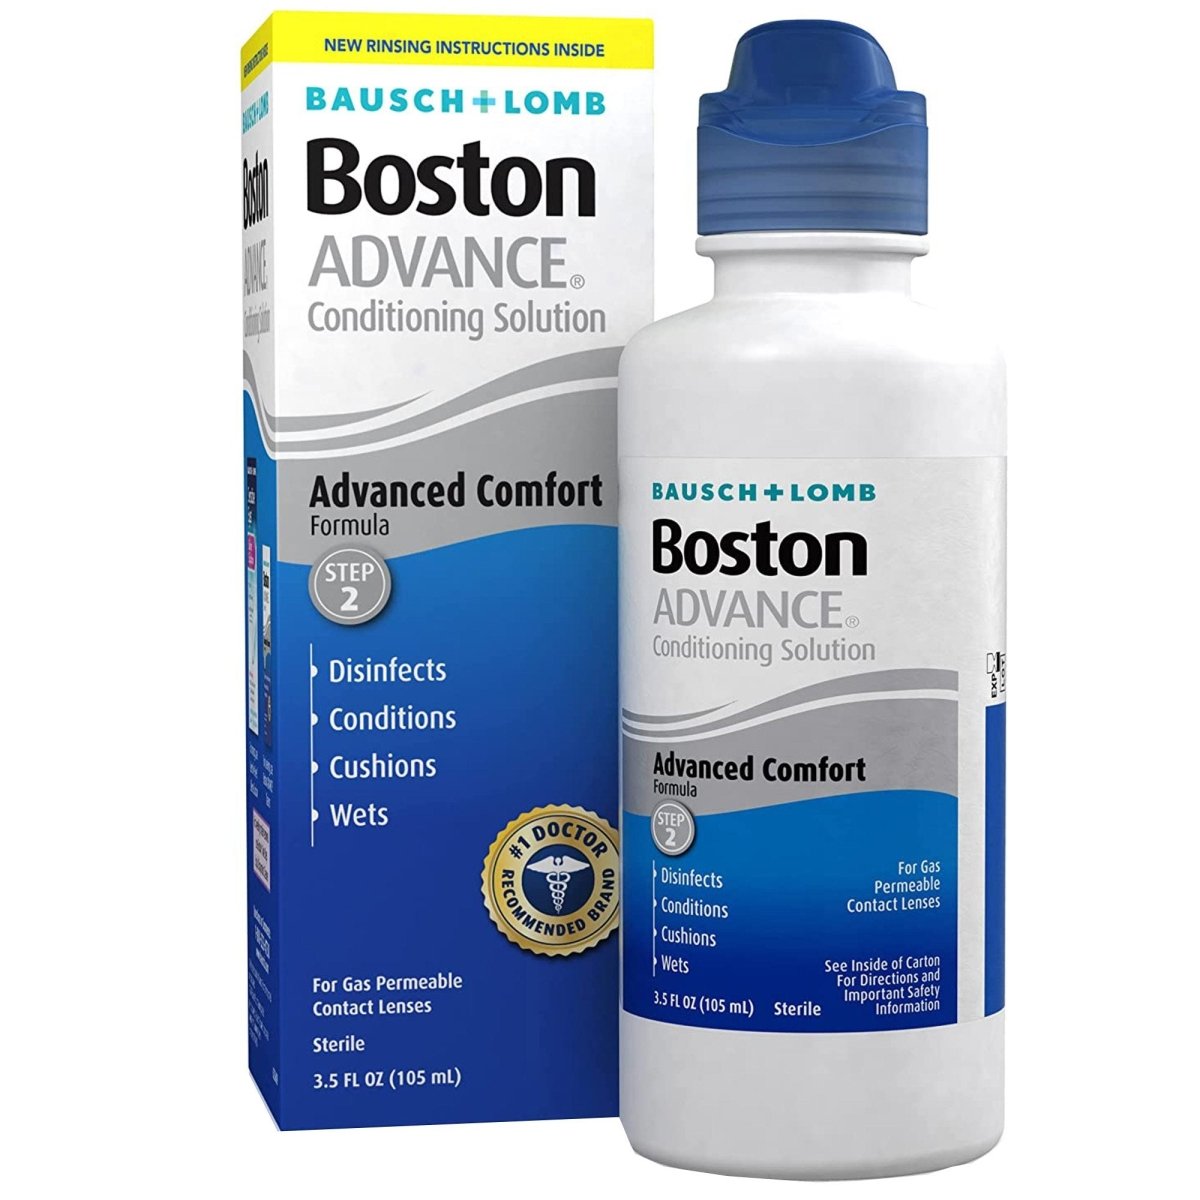 Boston Advance Conditioning Contact Lens Solution - 671560_EA - 1